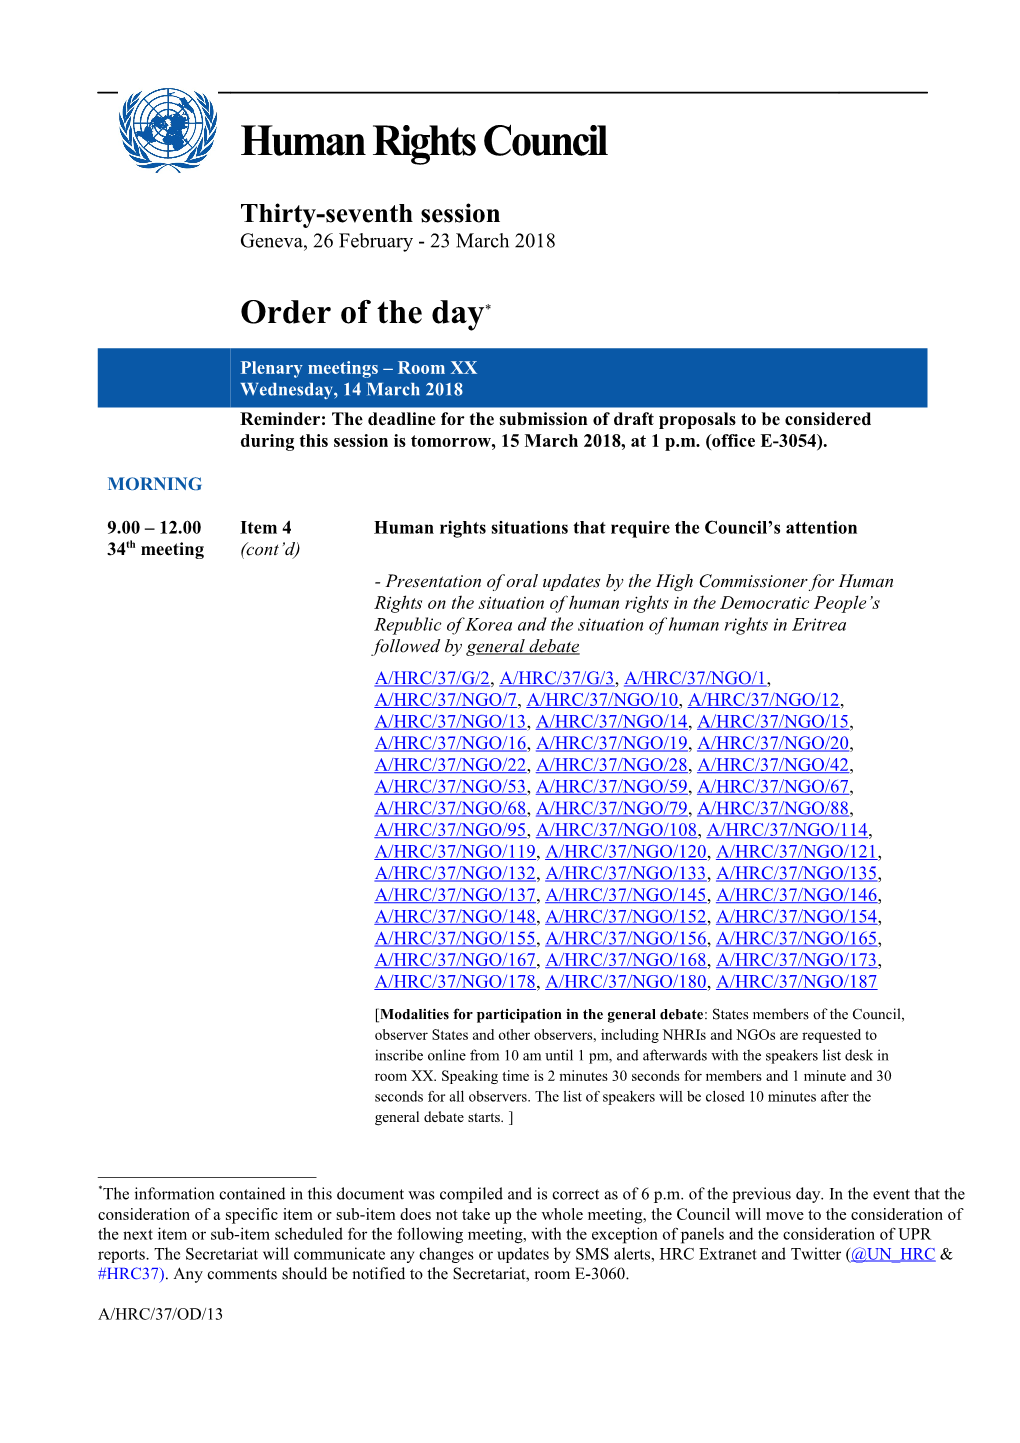 Order of the Day, Wednesday 14 March 2018